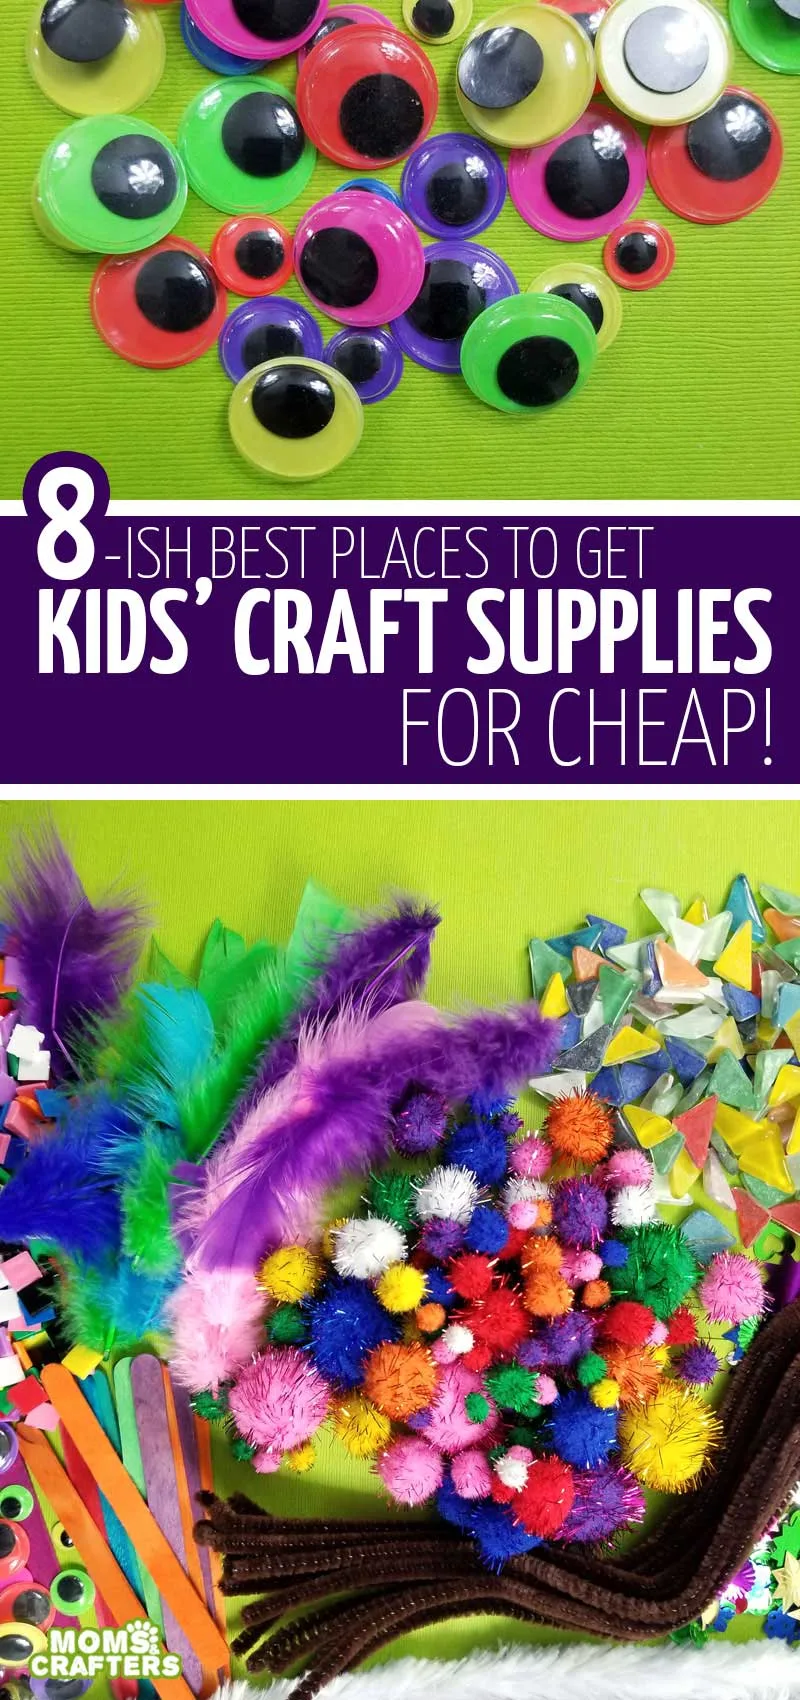 where can i buy cheap craft supplies